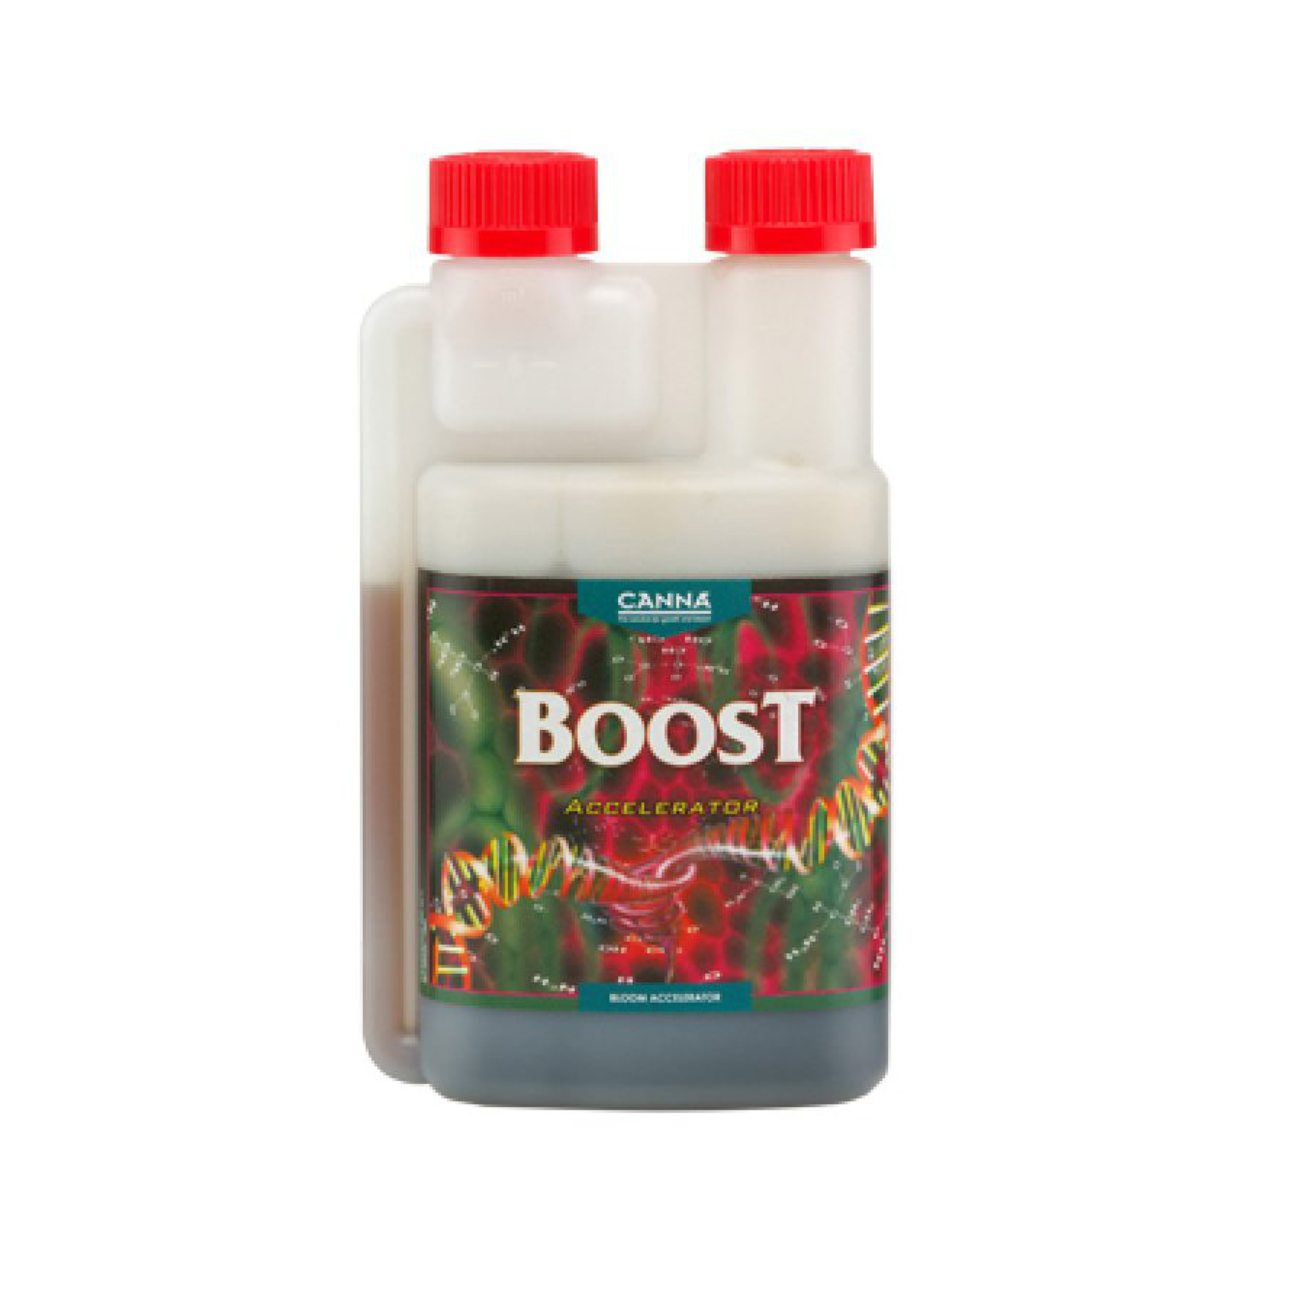 Canna Boost Accelerator - Flower Booster